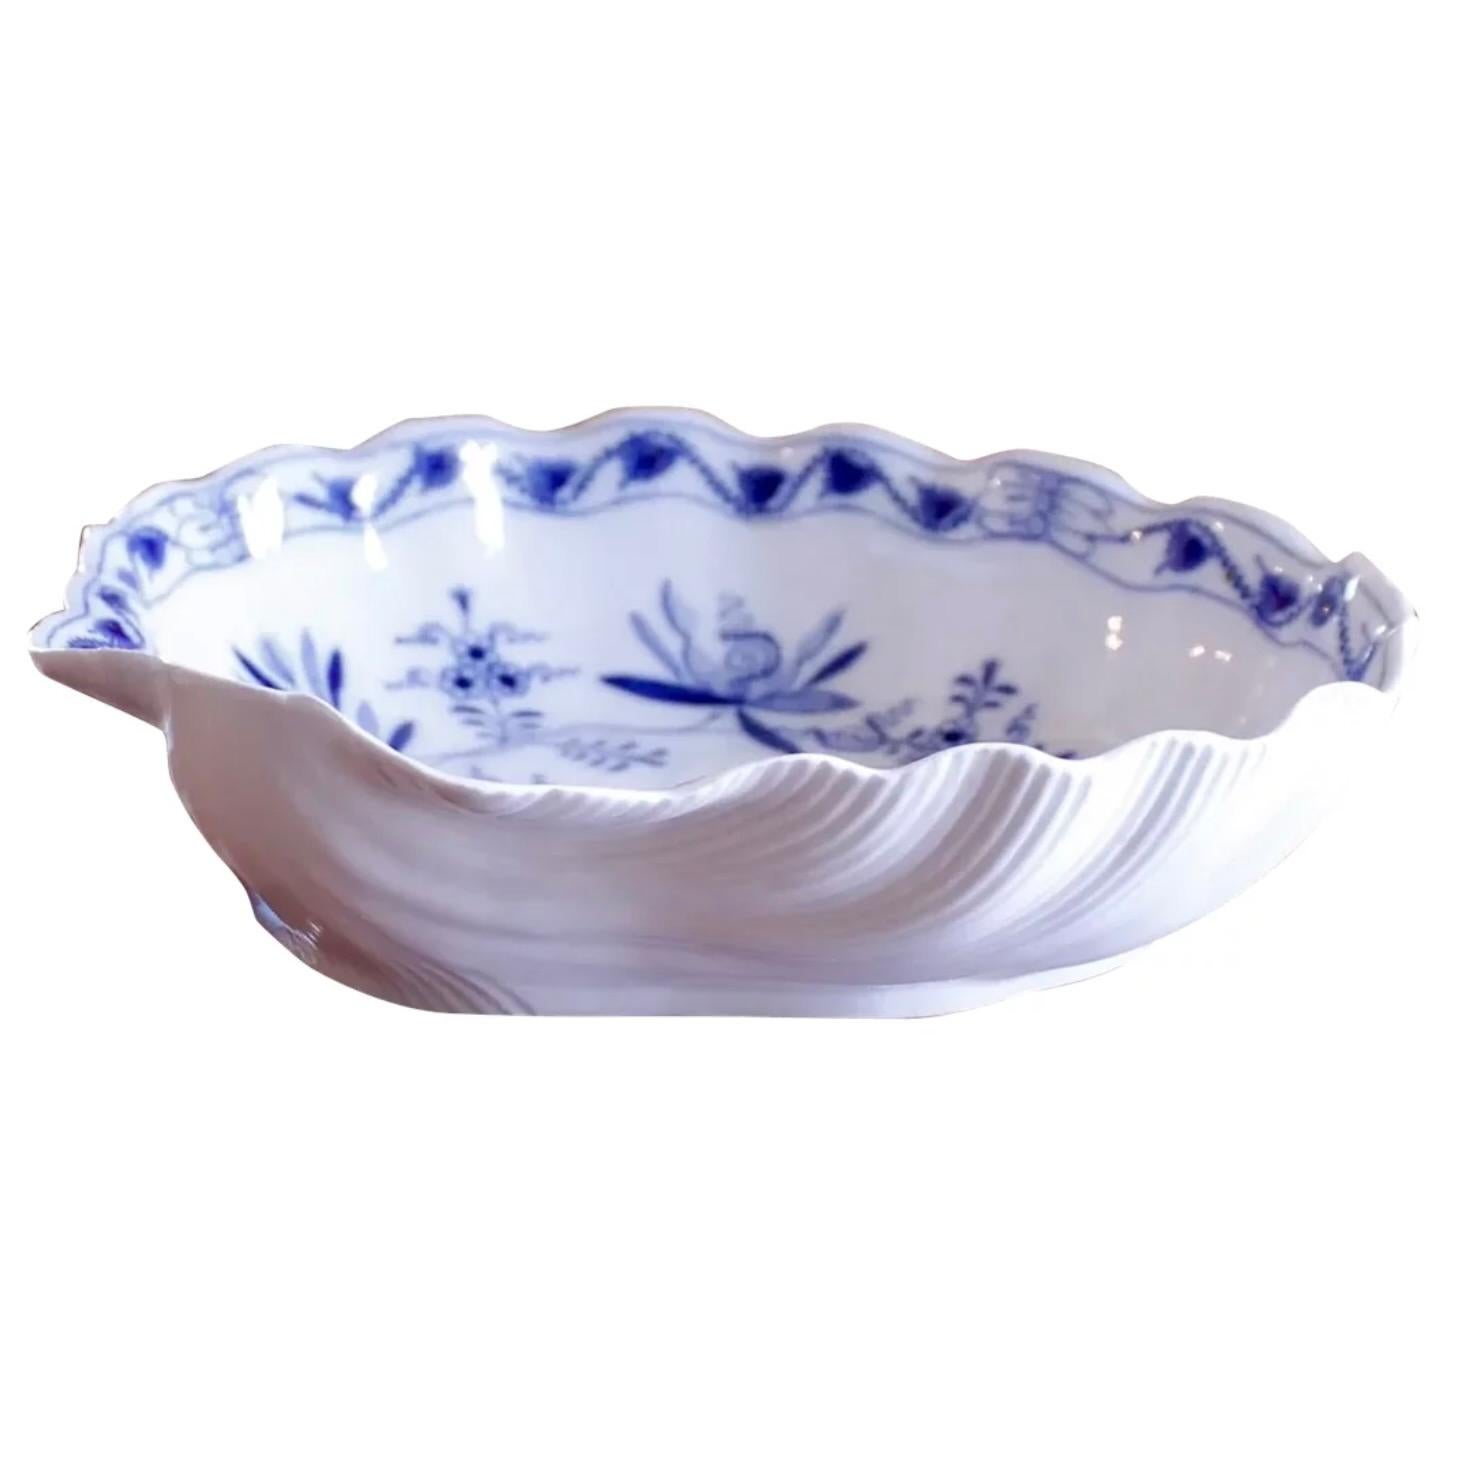 A deep and finely articulated ribbed scallop shaped early 19th century serving bowl in the pattern known as Blue Onion, which originated at the Meissen factory in Saxony in 1740, a European version in cobalt and white of popular Chinese porcelain